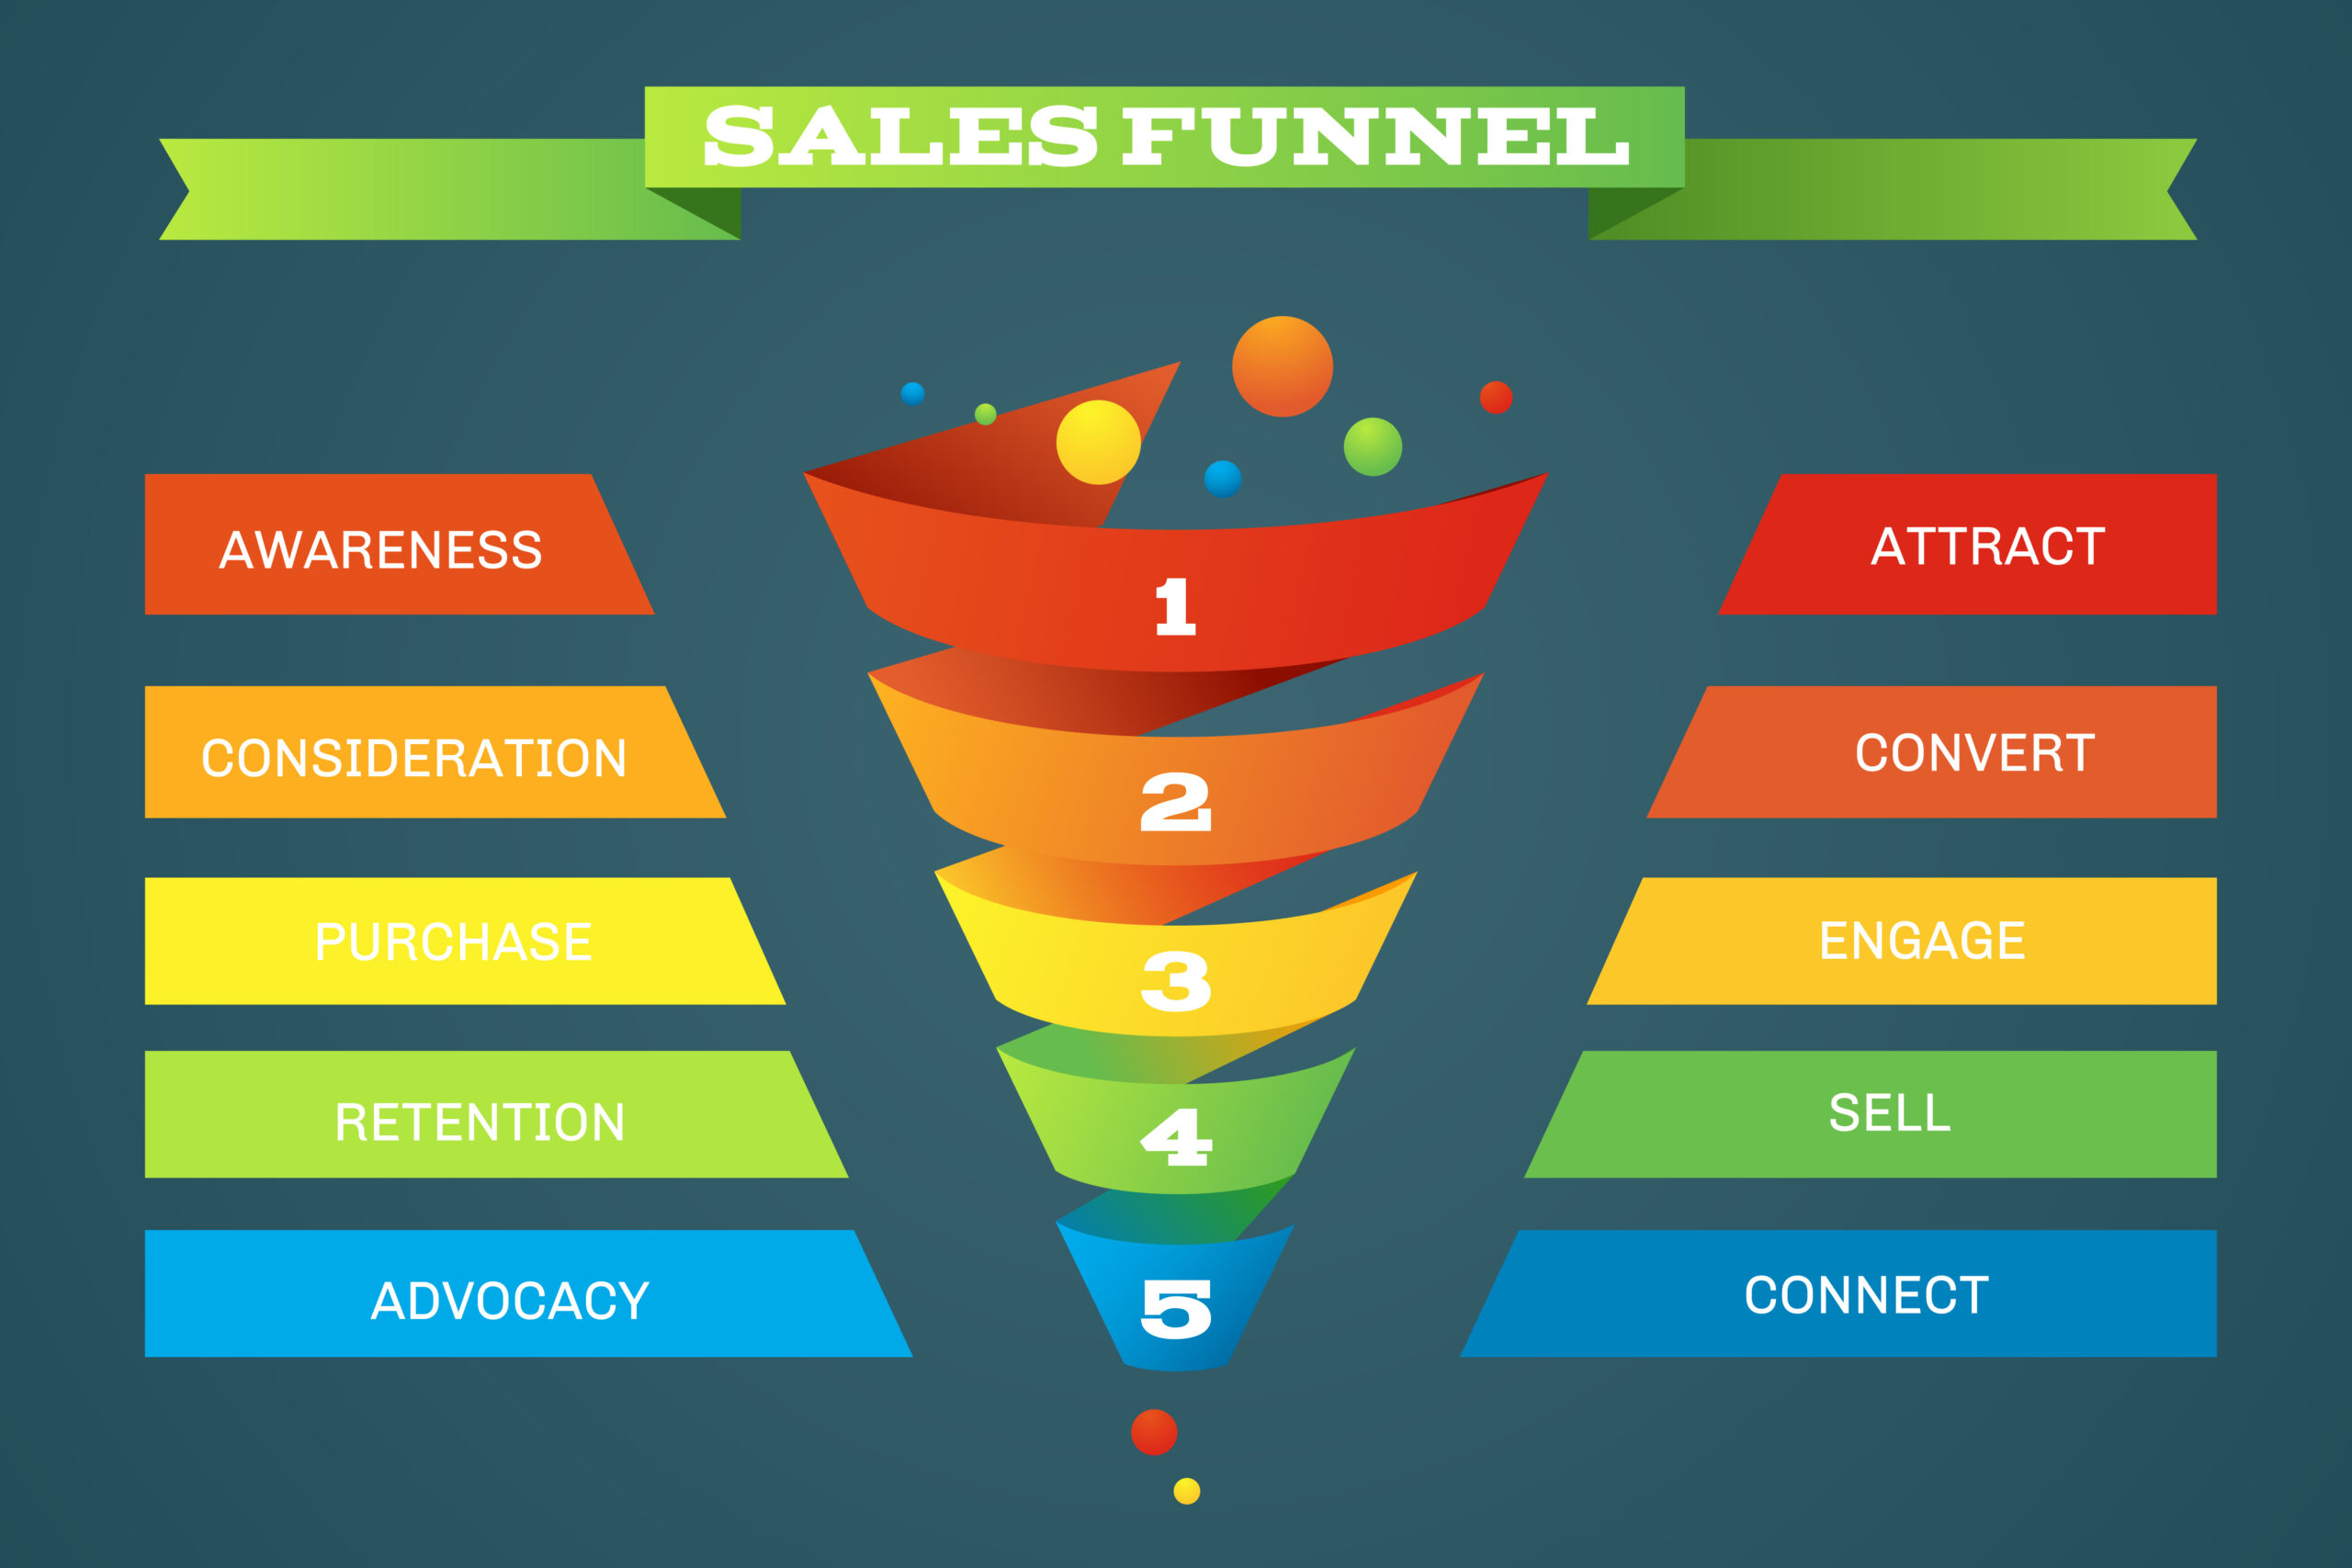 What Are the 5 Stages of Sales Funnel?